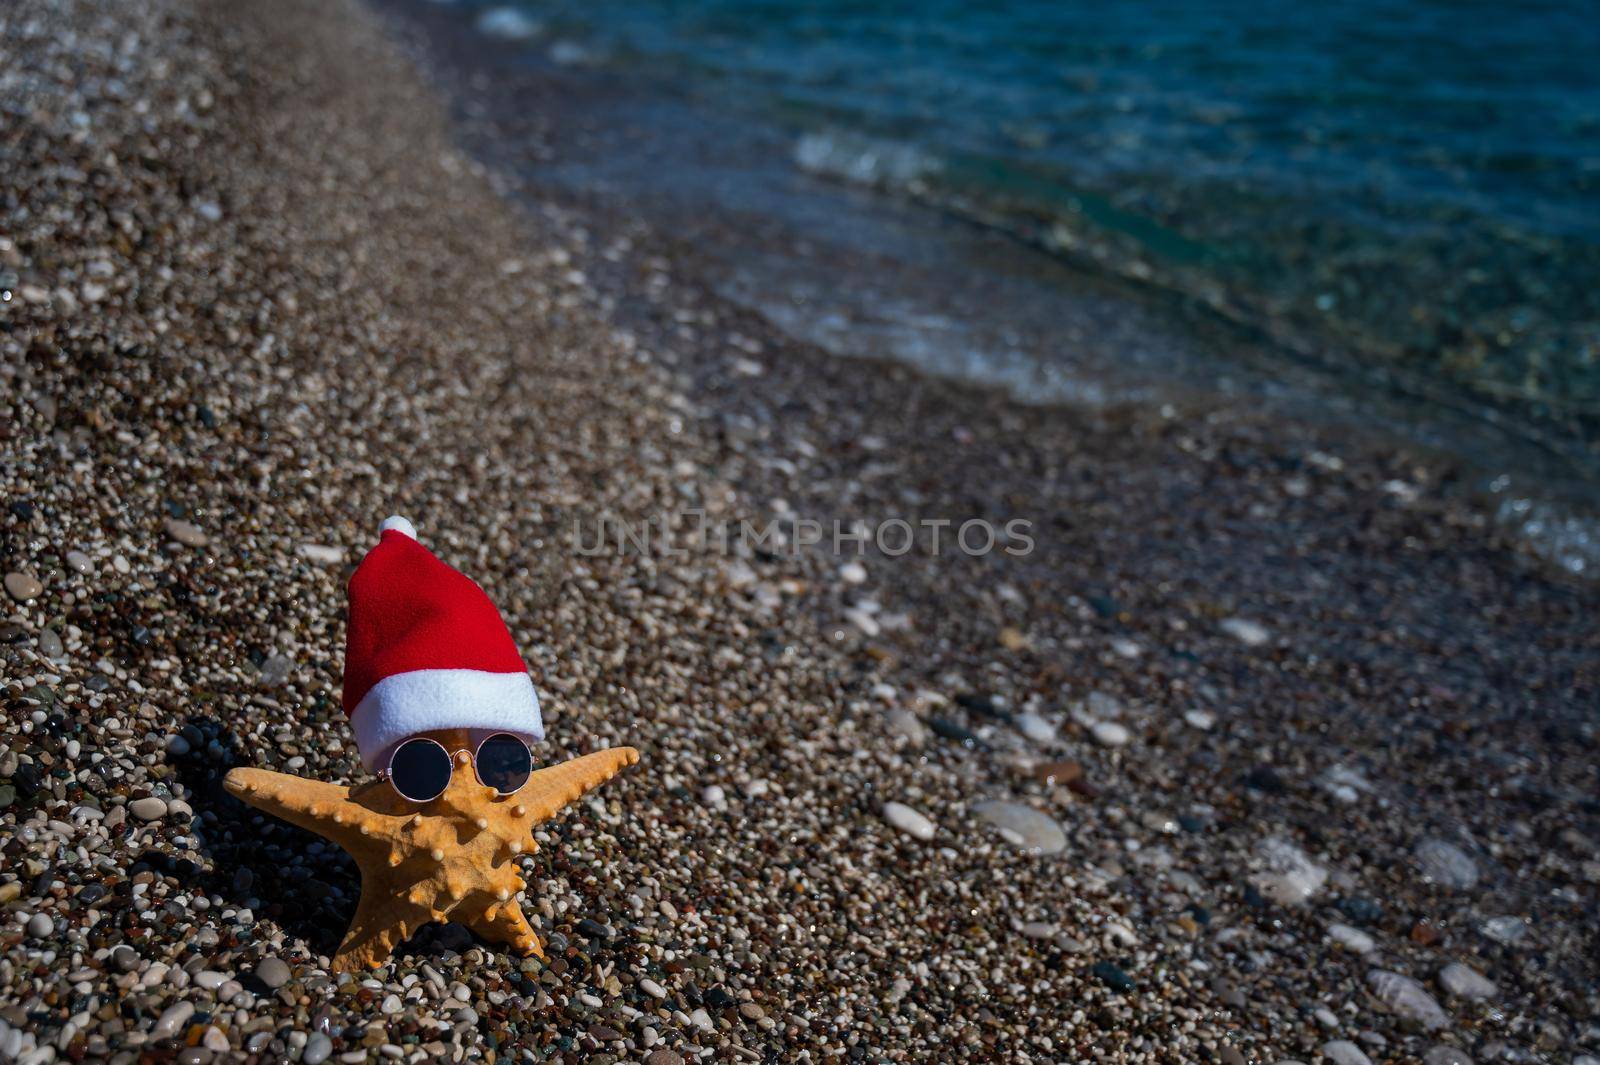 Starfish in santa claus hat and sunglasses on a pebble beach by the sea. by mrwed54